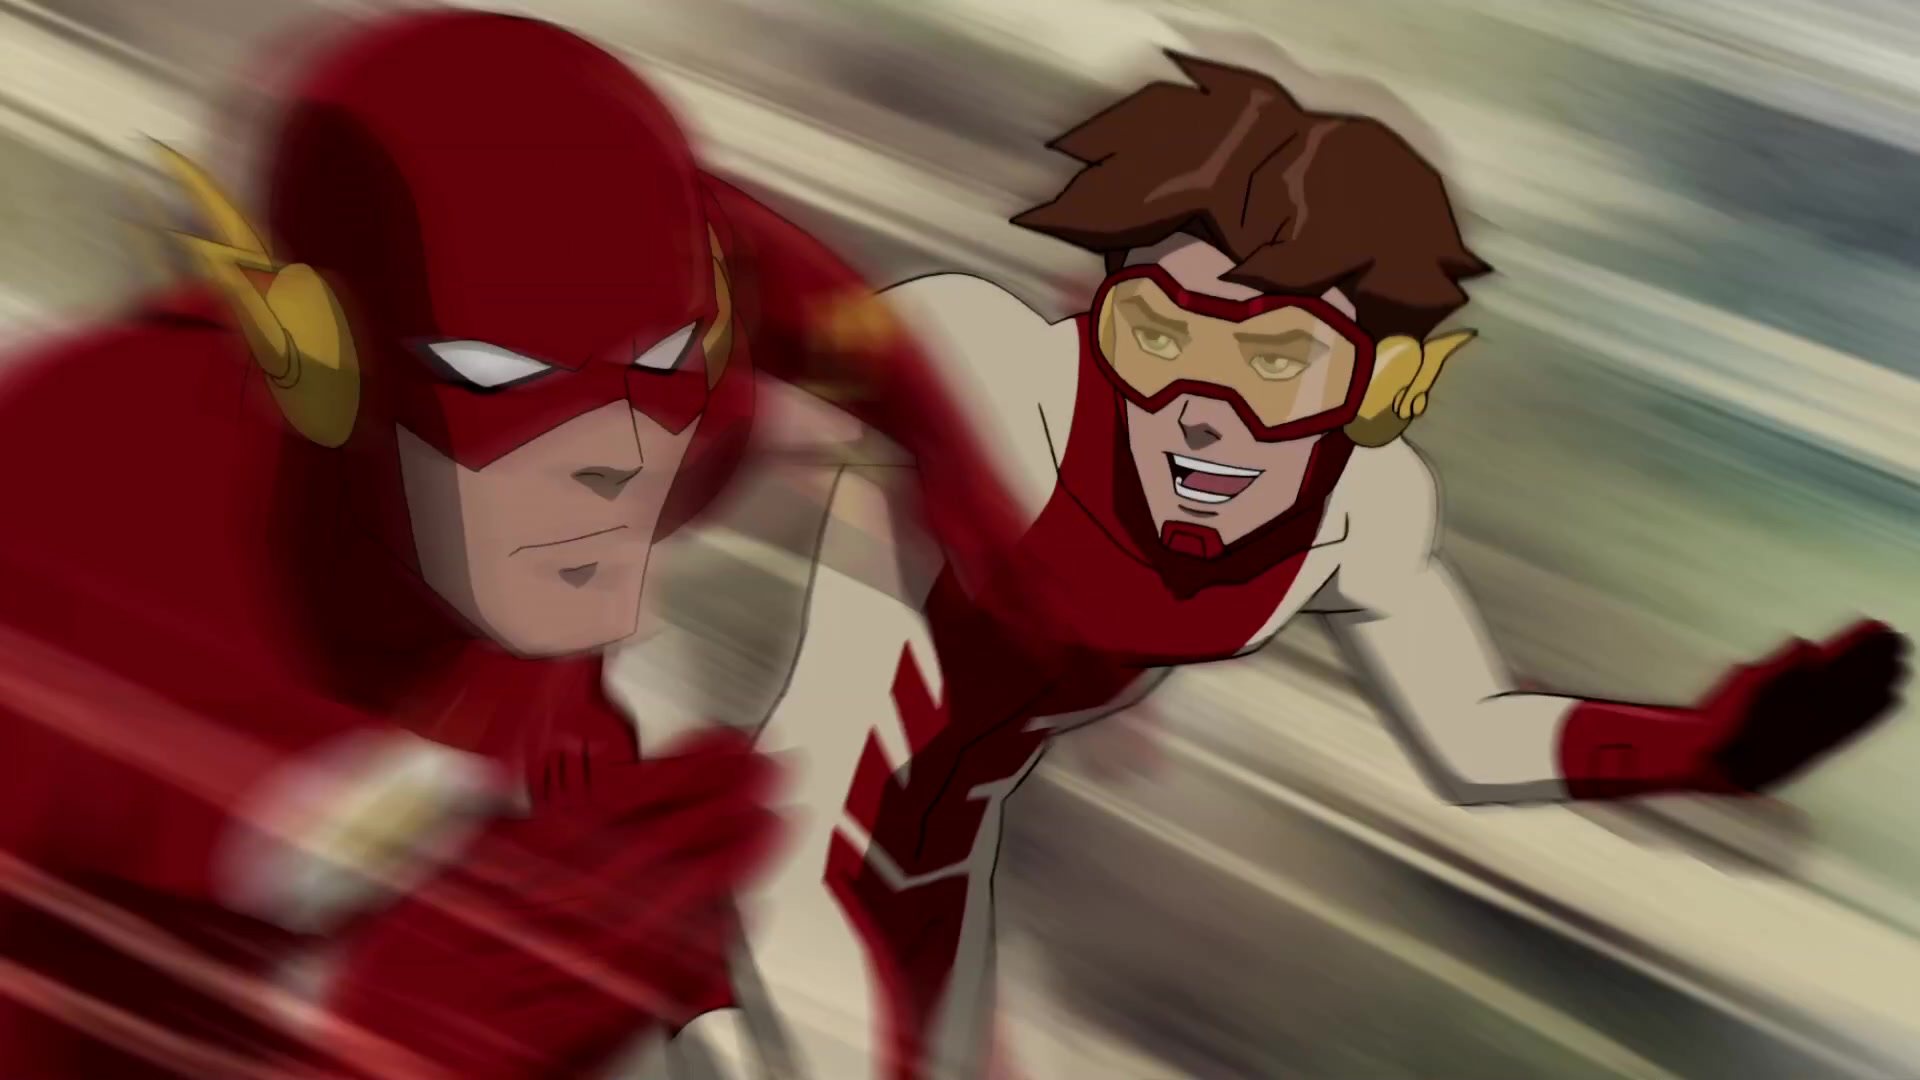 Bart Allen (James Marsden) annoys his grandfather Barry (George Eads) in Young Justice Season 2 Episode 6 "Bloodlines" (2012), Warner Bros. Animation